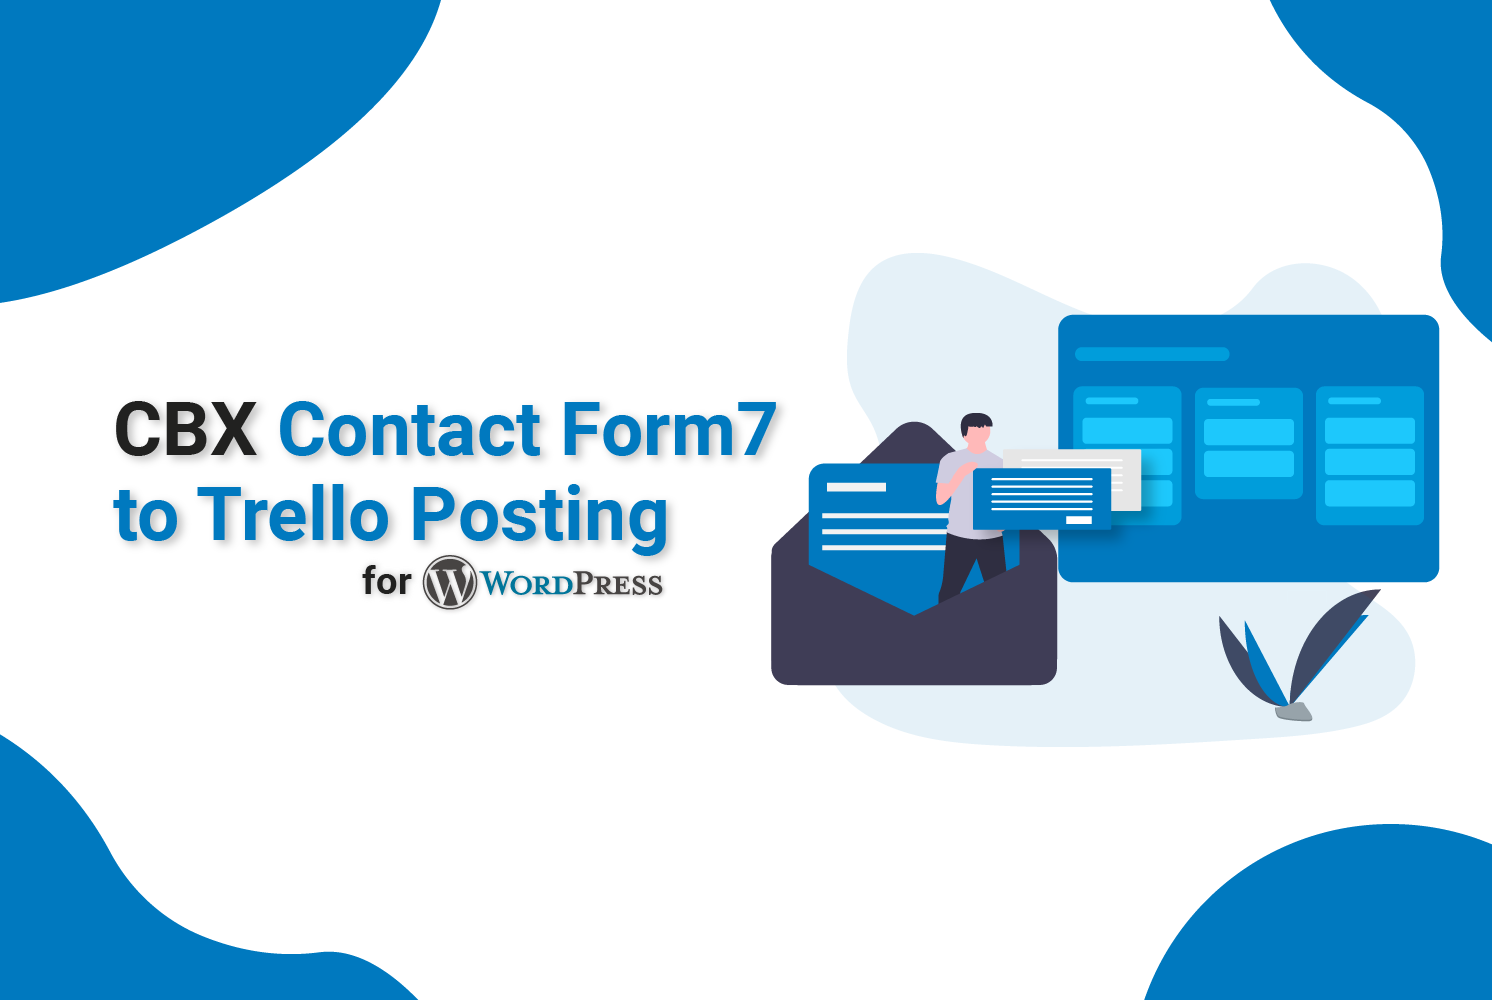 CBX Contact Form7 to Trello Posting